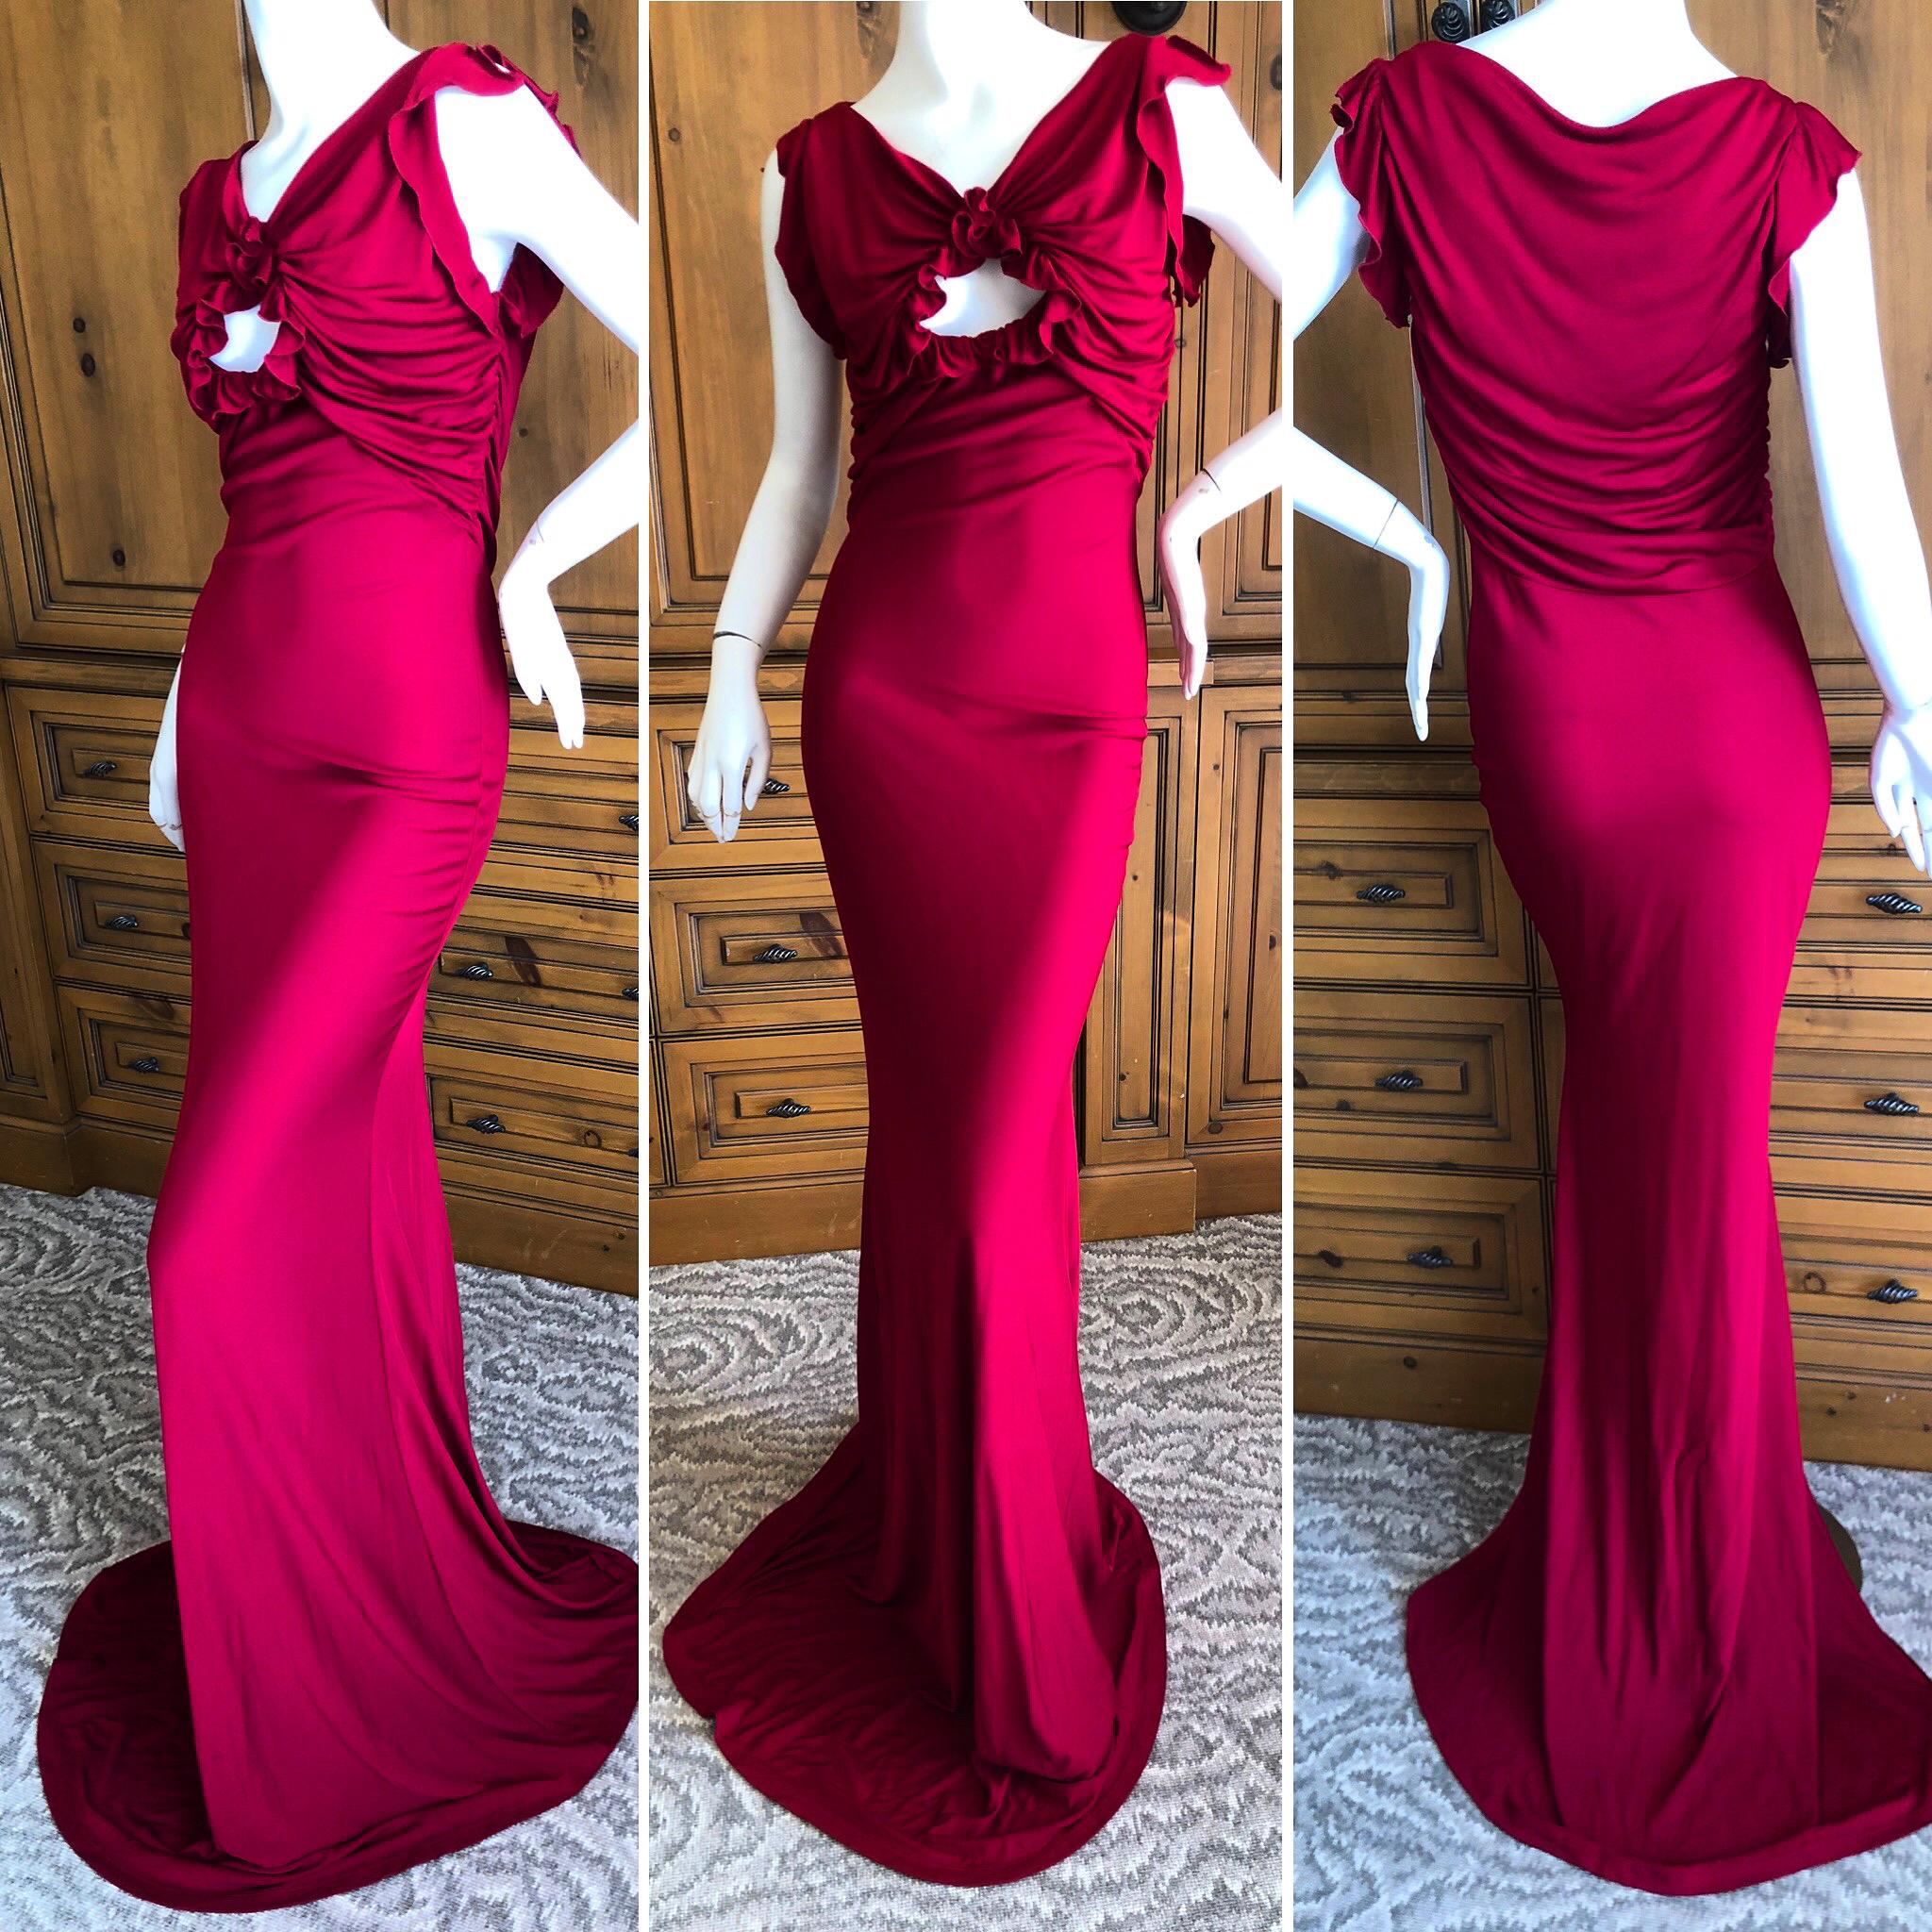   John Galliano Vintage Bias Cut Red Evening Dress with Keyhole Details
Size S
Bust 36